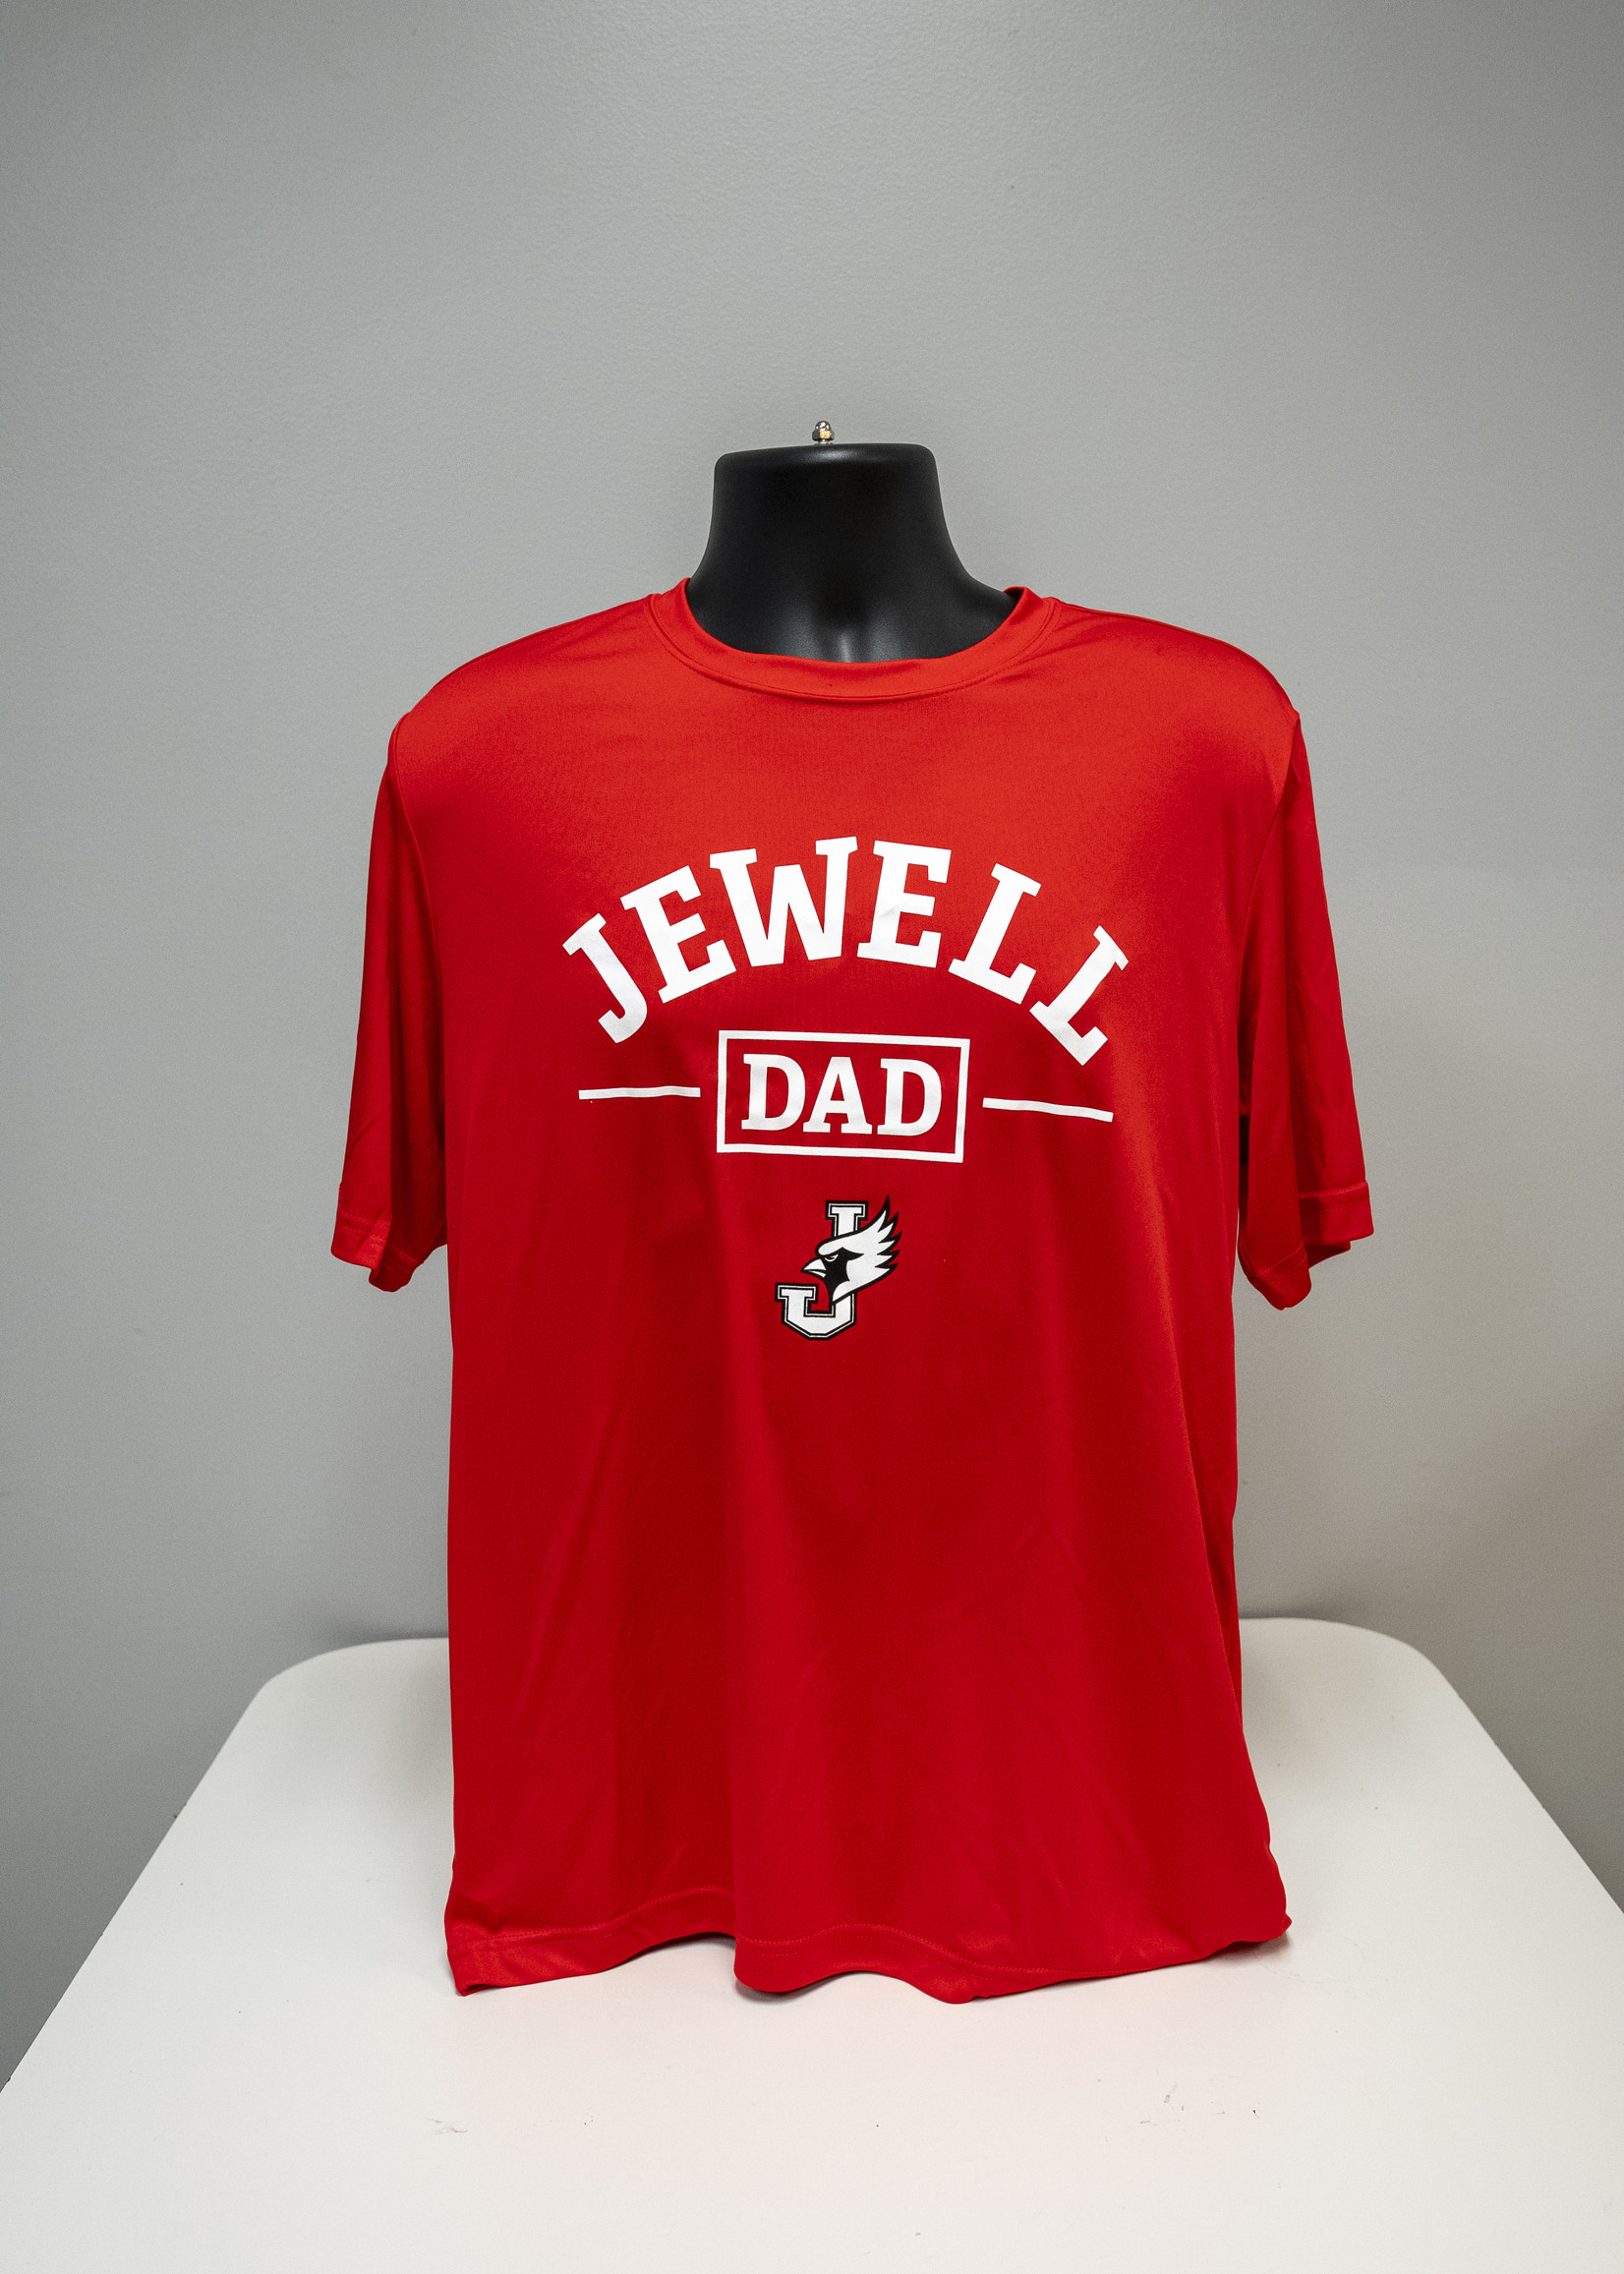 Dry Fit Short Sleeve Red Jewell DAD